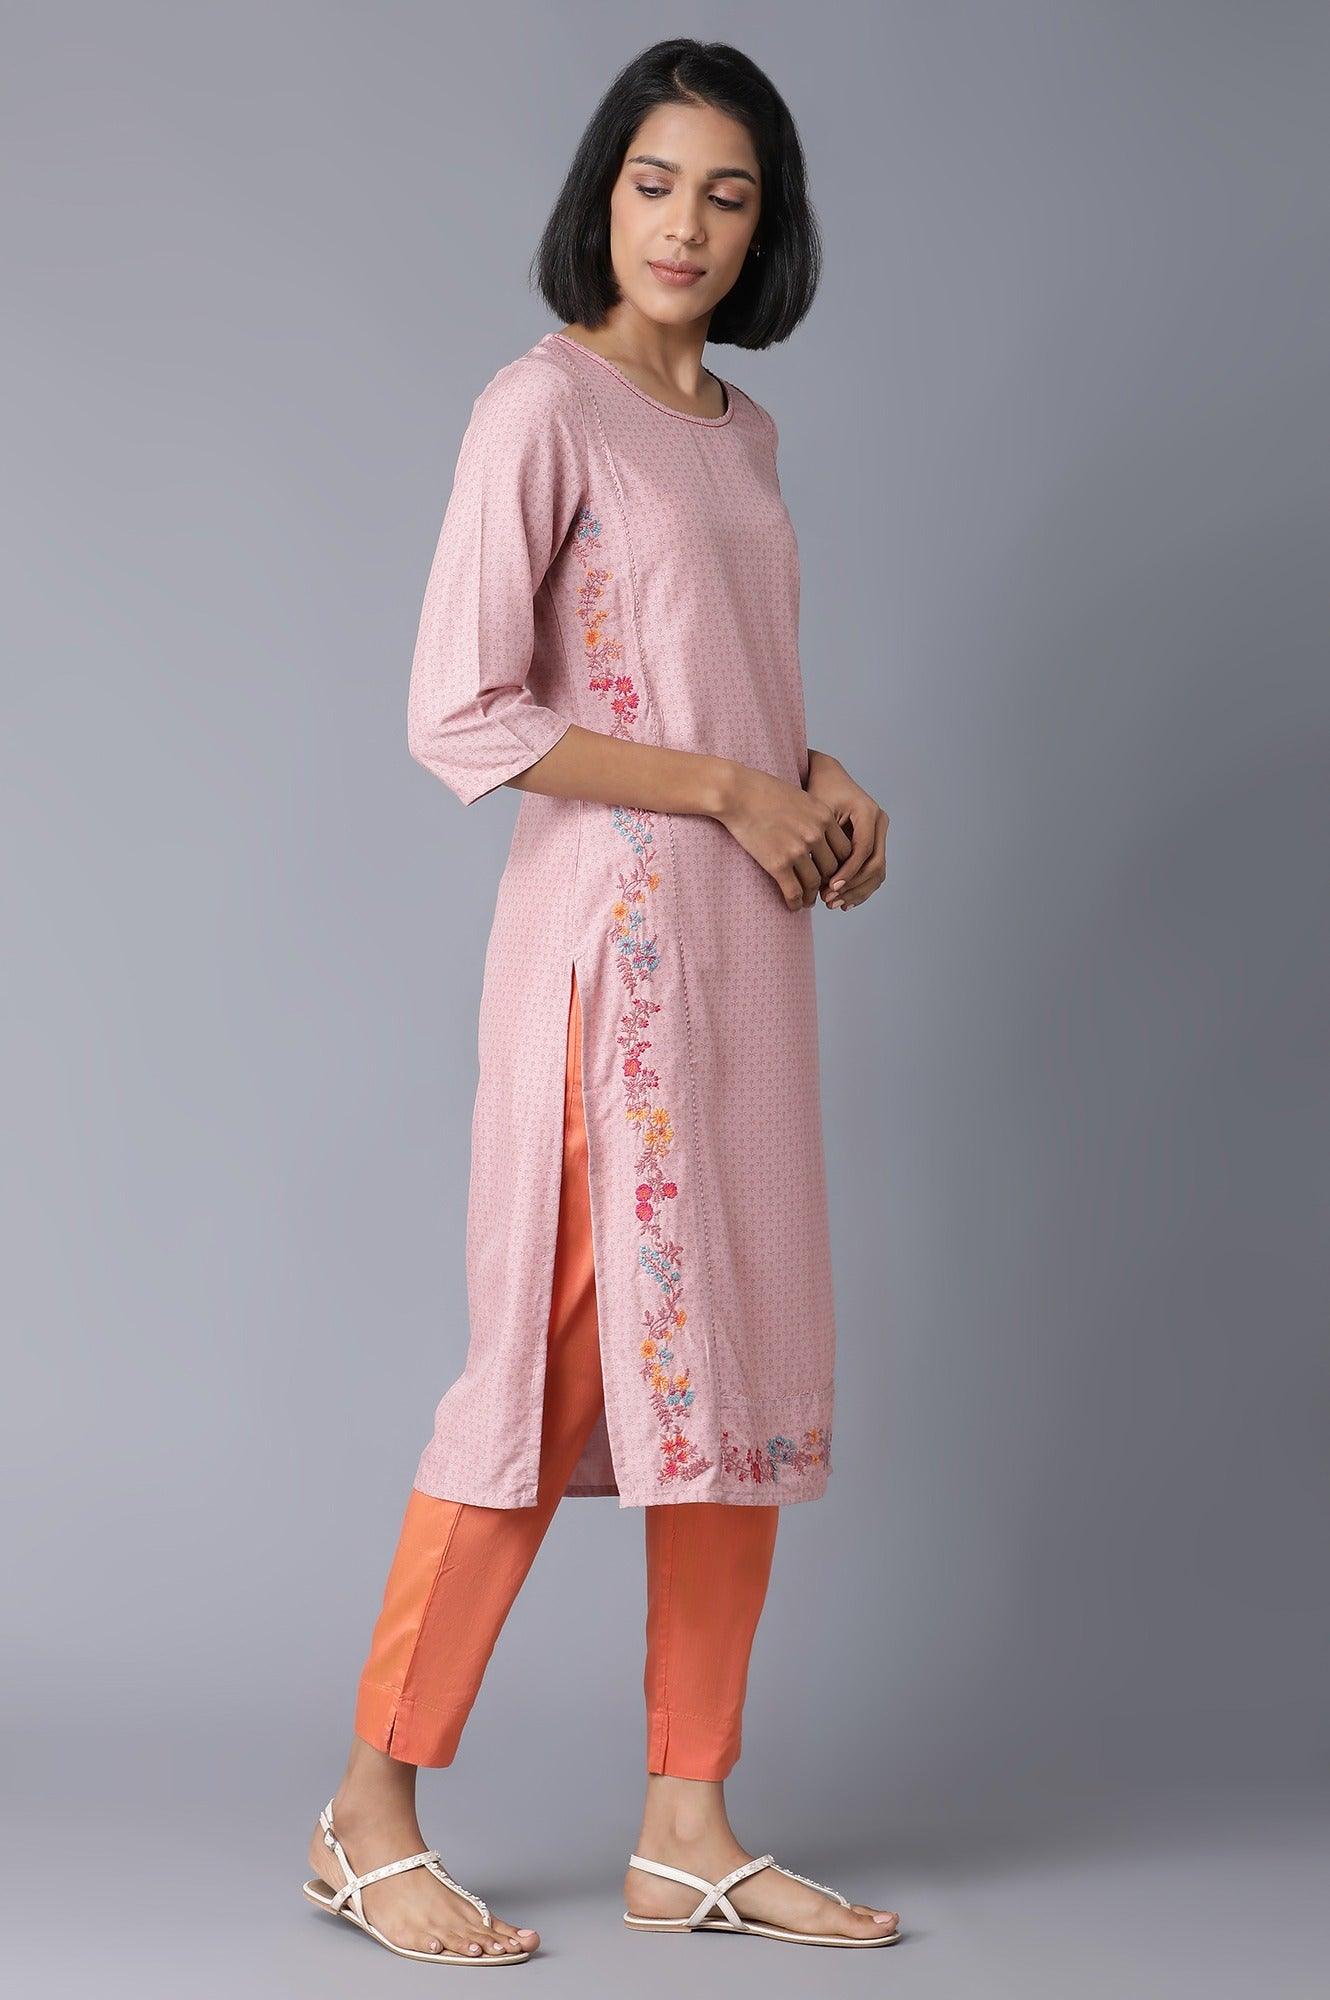 Light Pink Floral Print kurta With Thread Embroidery - wforwoman